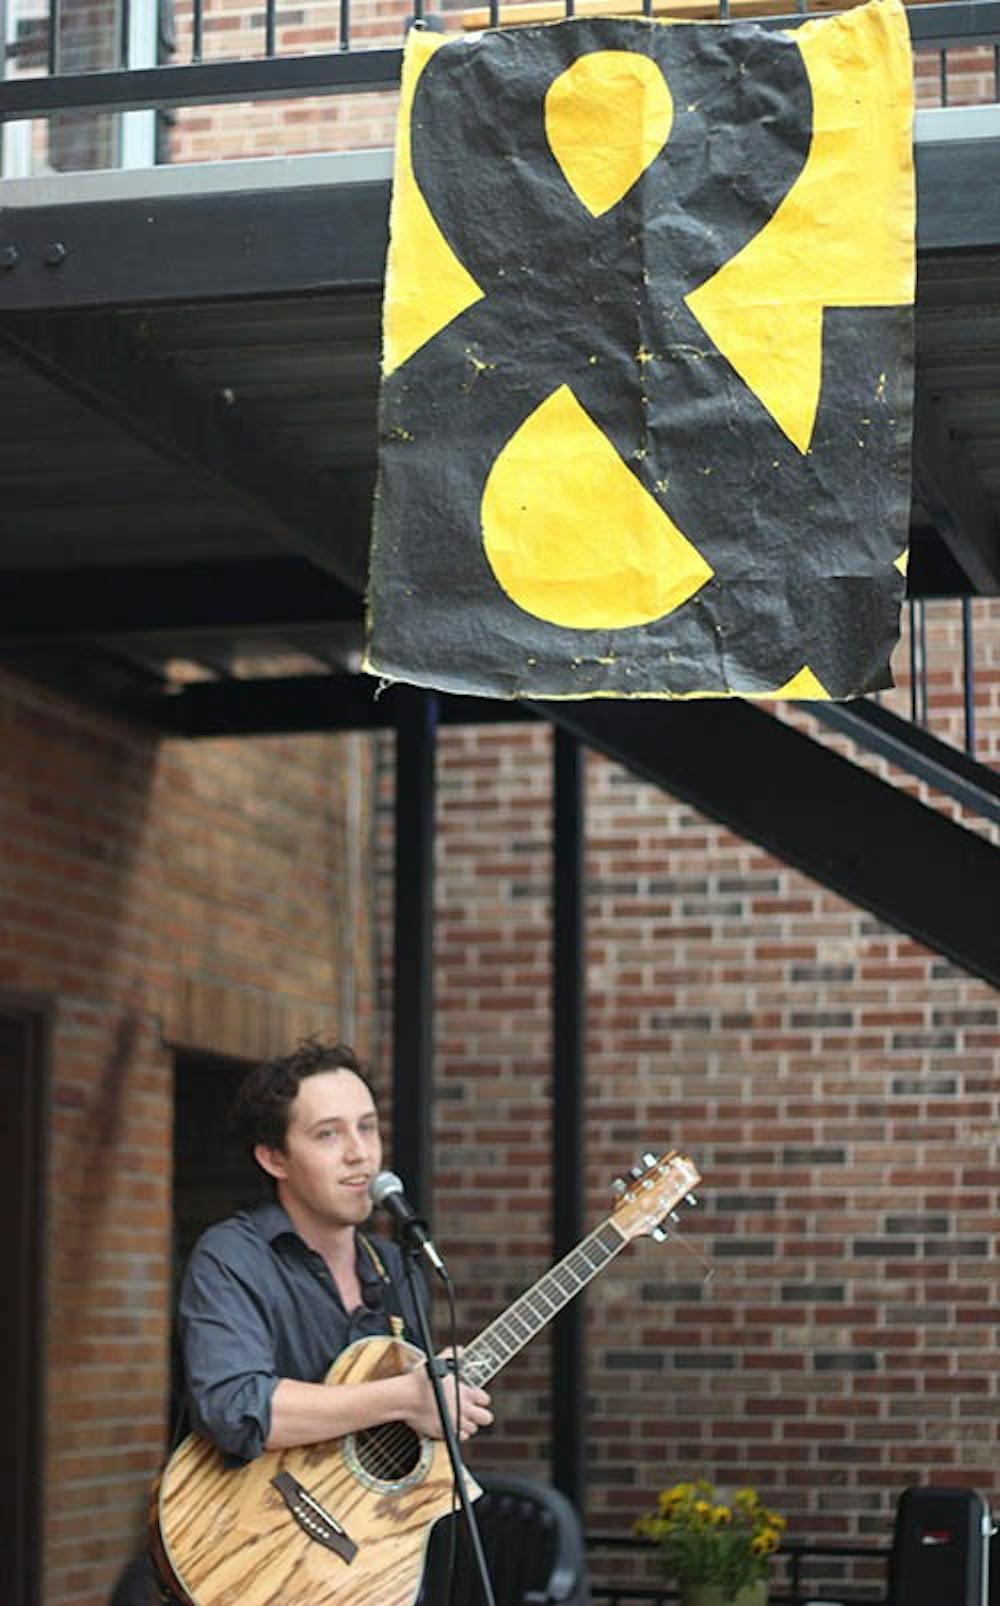 Phil Tislow sings at the Cup during the free art show hosted by Glue and Scissors Society. The event showcases community produced artwork that will remain hanging in the cup during the month of June.  DN PHOTO KRYSTAL BYERS 